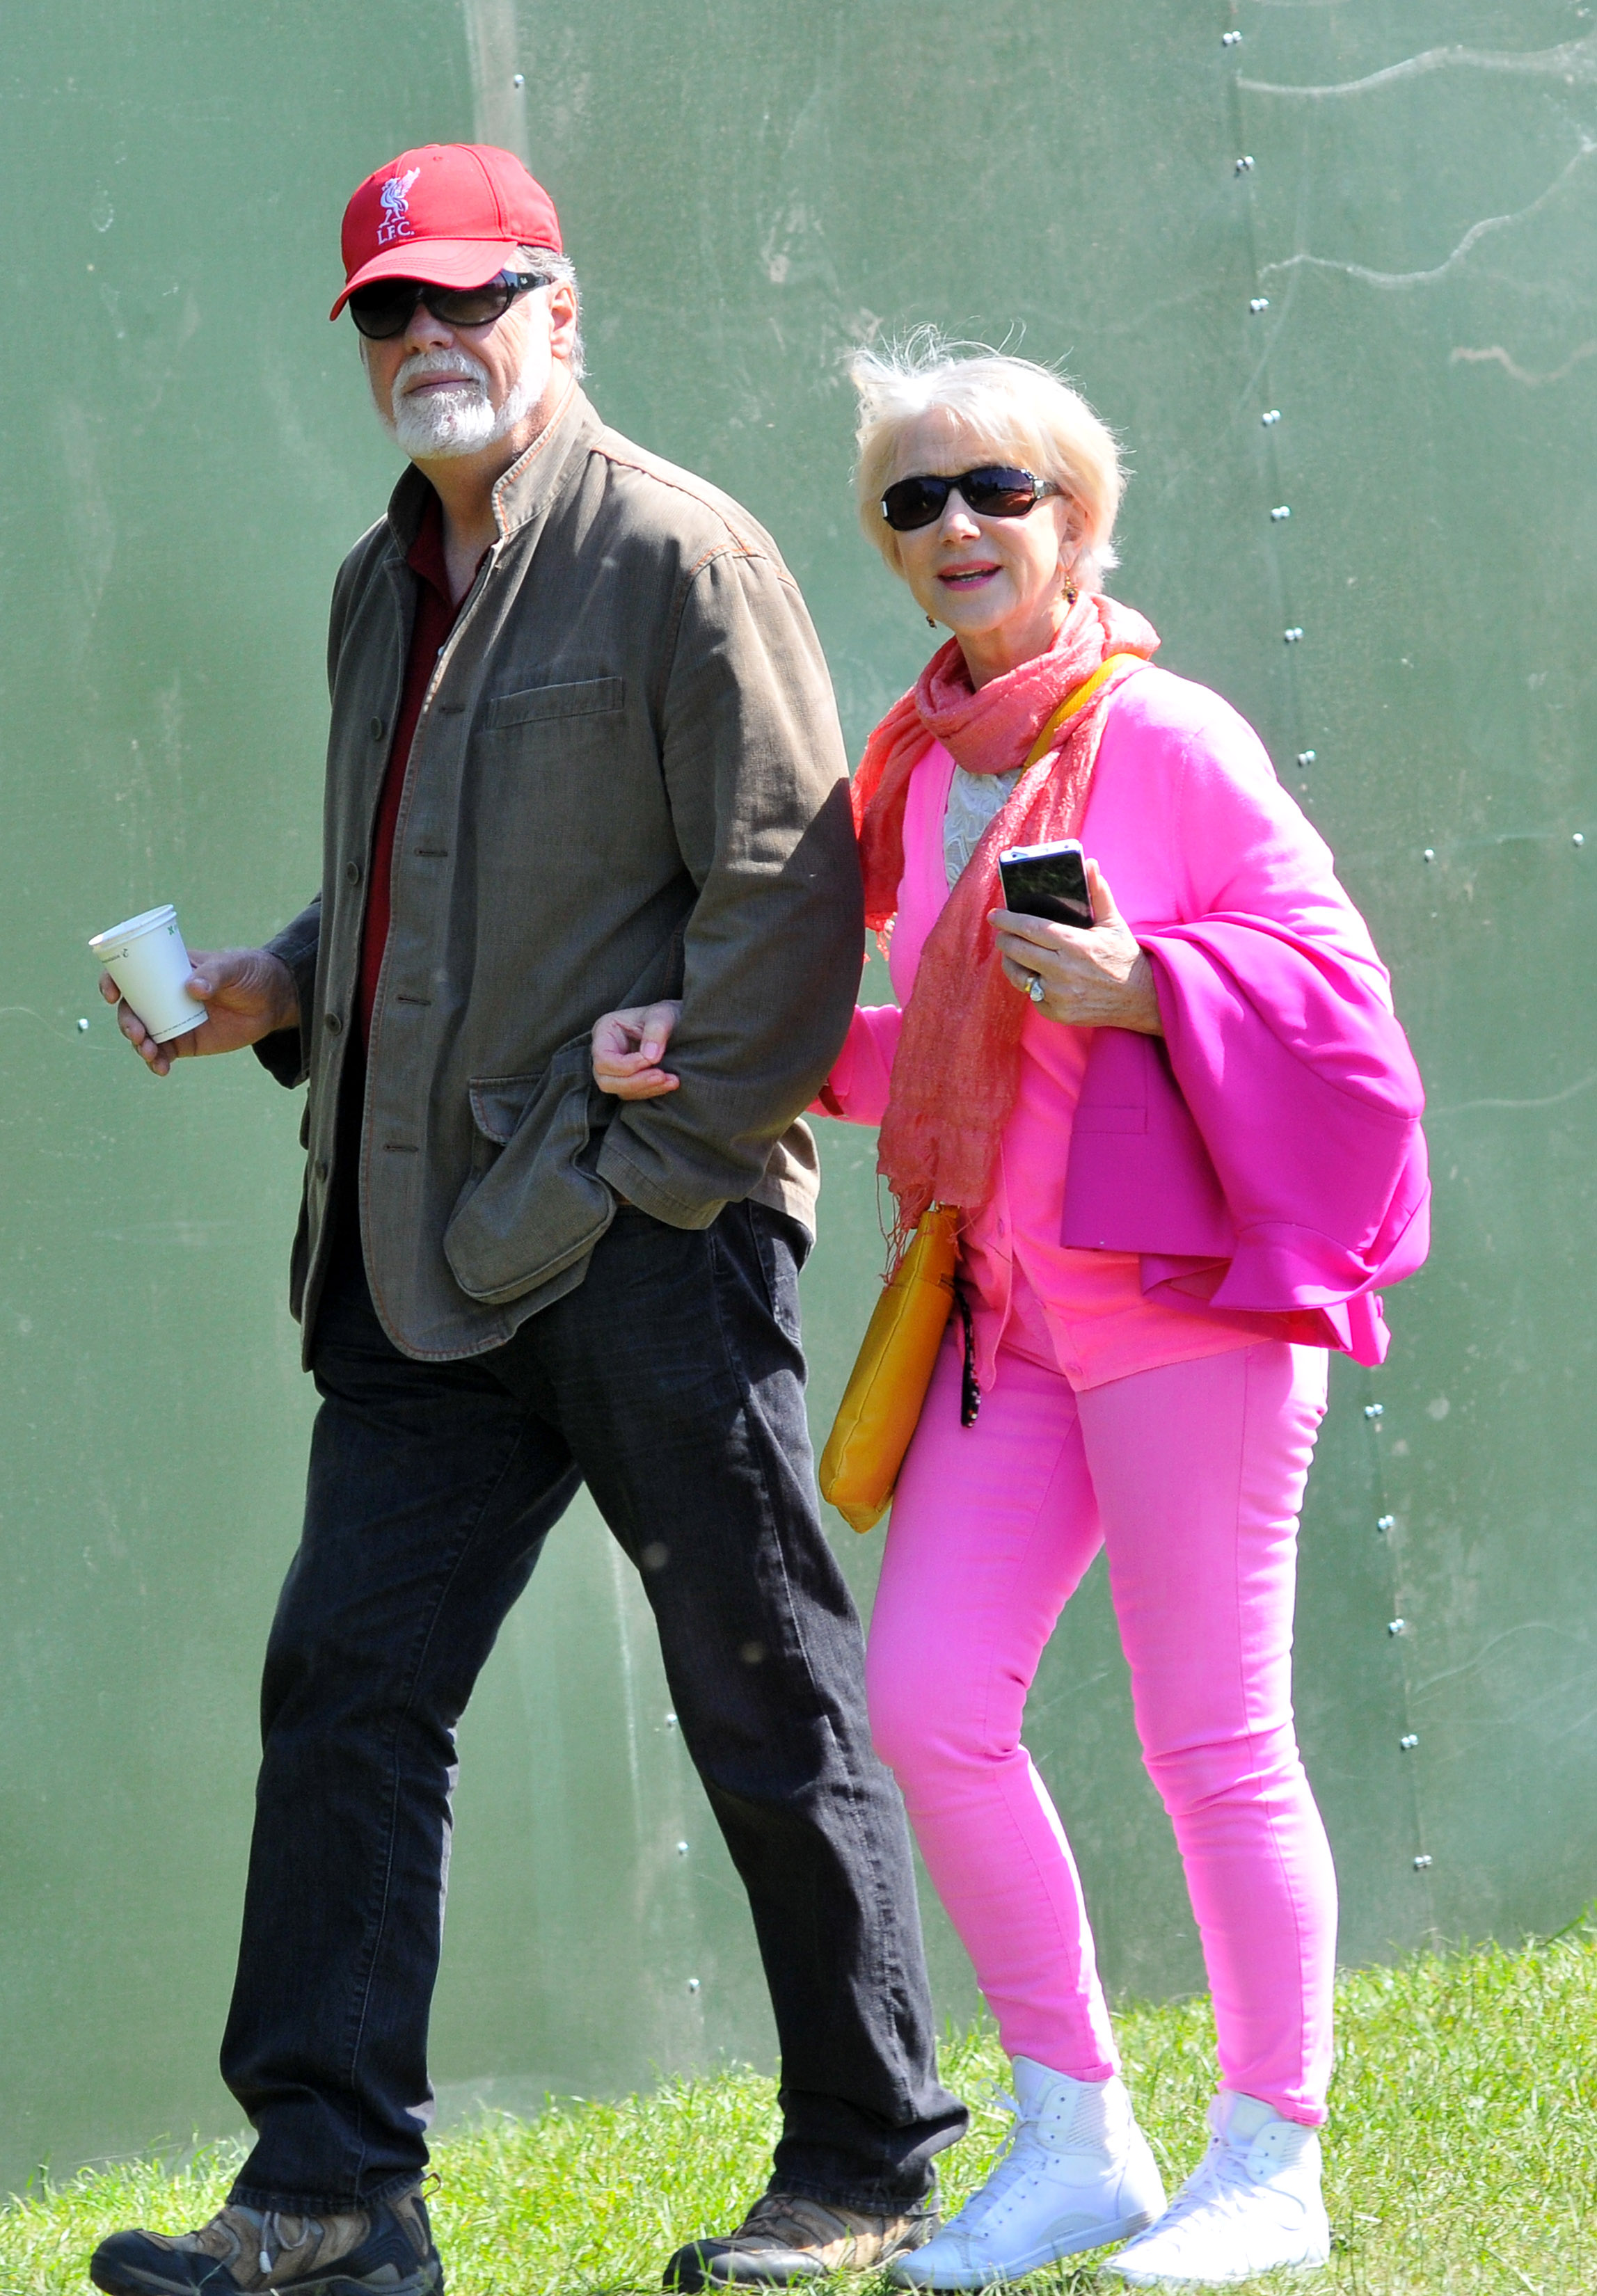 Helen Mirren and Taylor Hackford at the As One in the Park Music Festival at Victoria Park on May 26, 2013 in London, England | Source: Getty Images